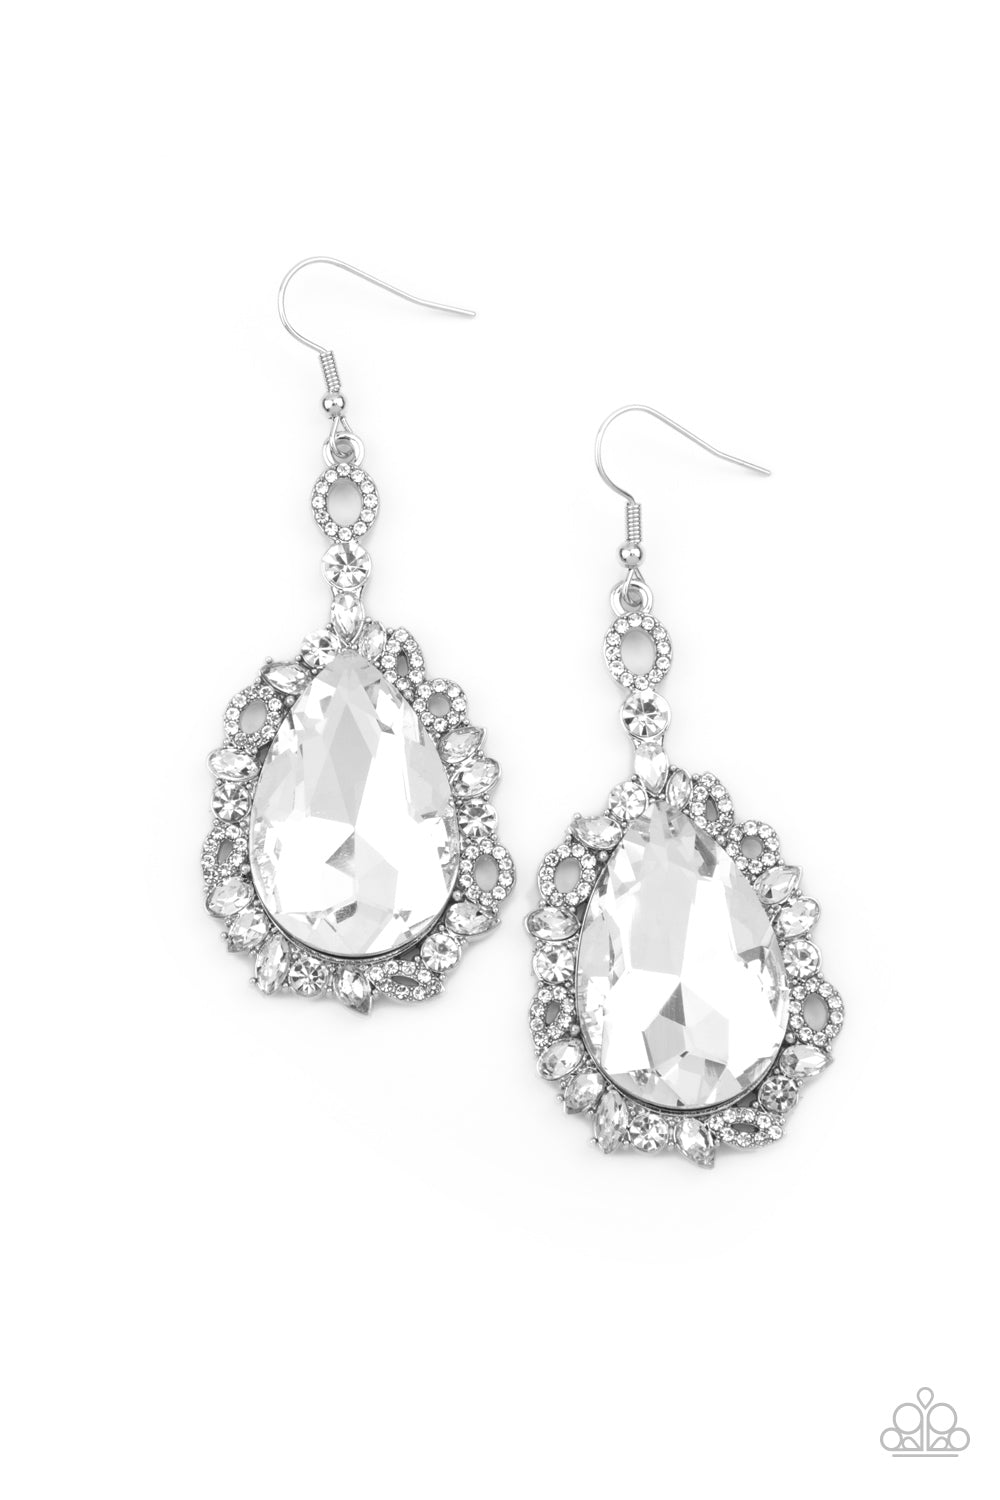 Featuring round, teardrop, and oval shapes, white rhinestone encrusted filigree borders a dramatically oversized white rhinestone teardrop for a jaw-dropping dazzle. Earring attaches to a standard fishhook fitting.